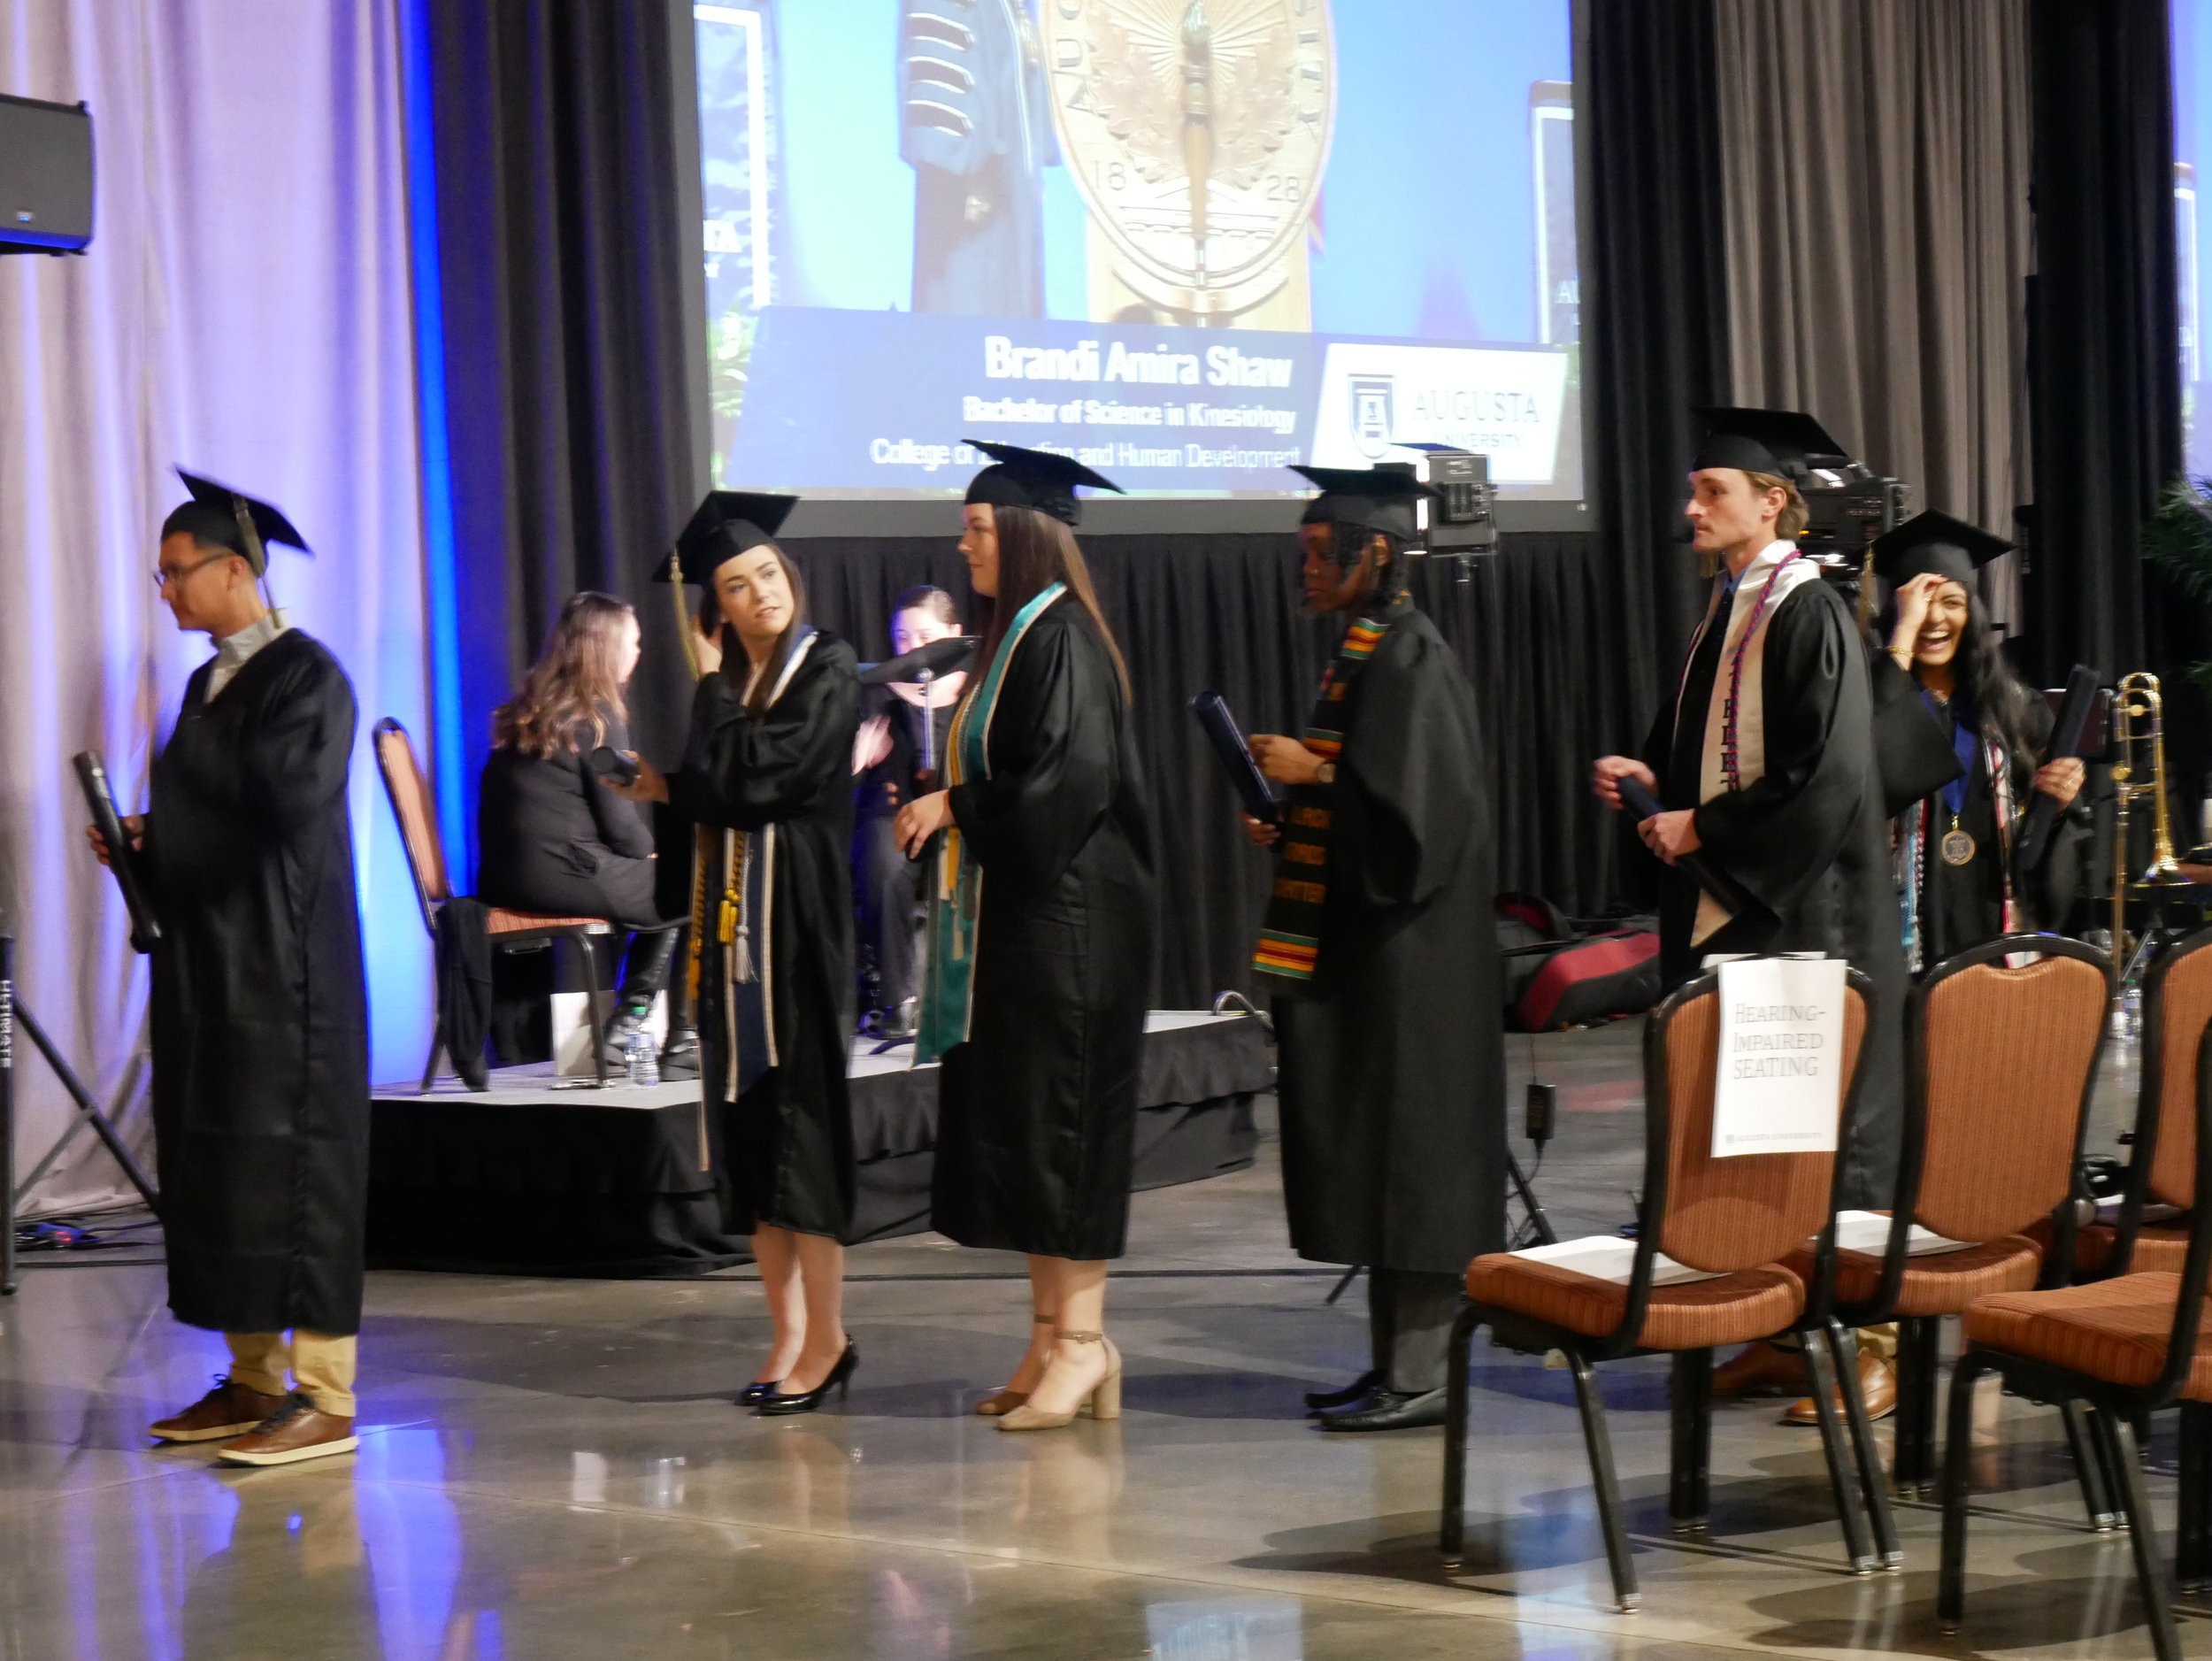  Graduates wait in line to have their photos taken at commencement.  (photo by Brionna Law)  